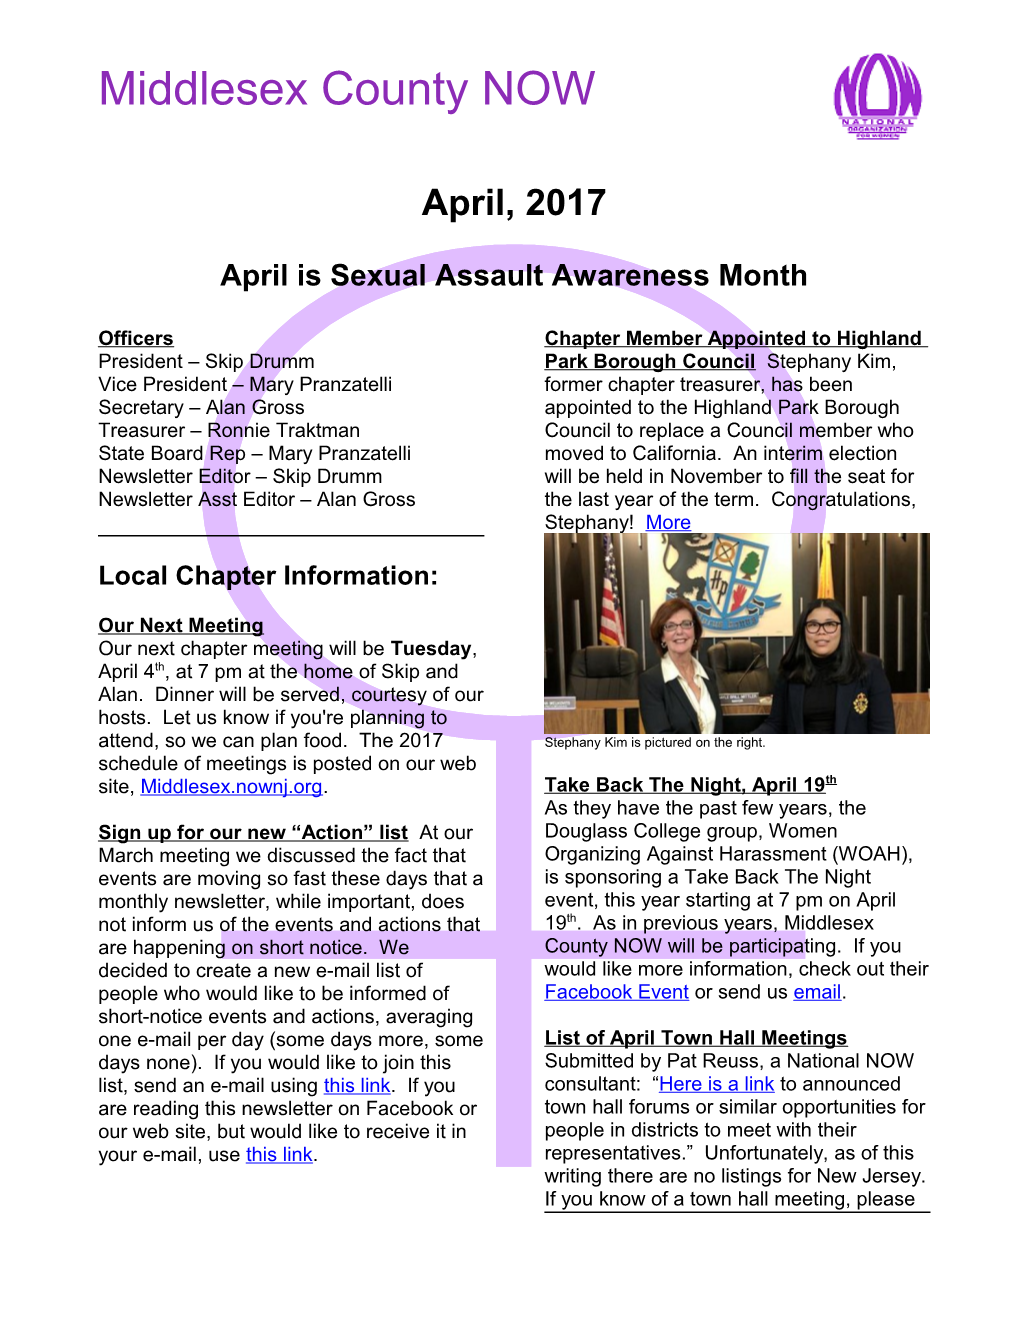 Middlesex County NOW Newsletter, April 2017